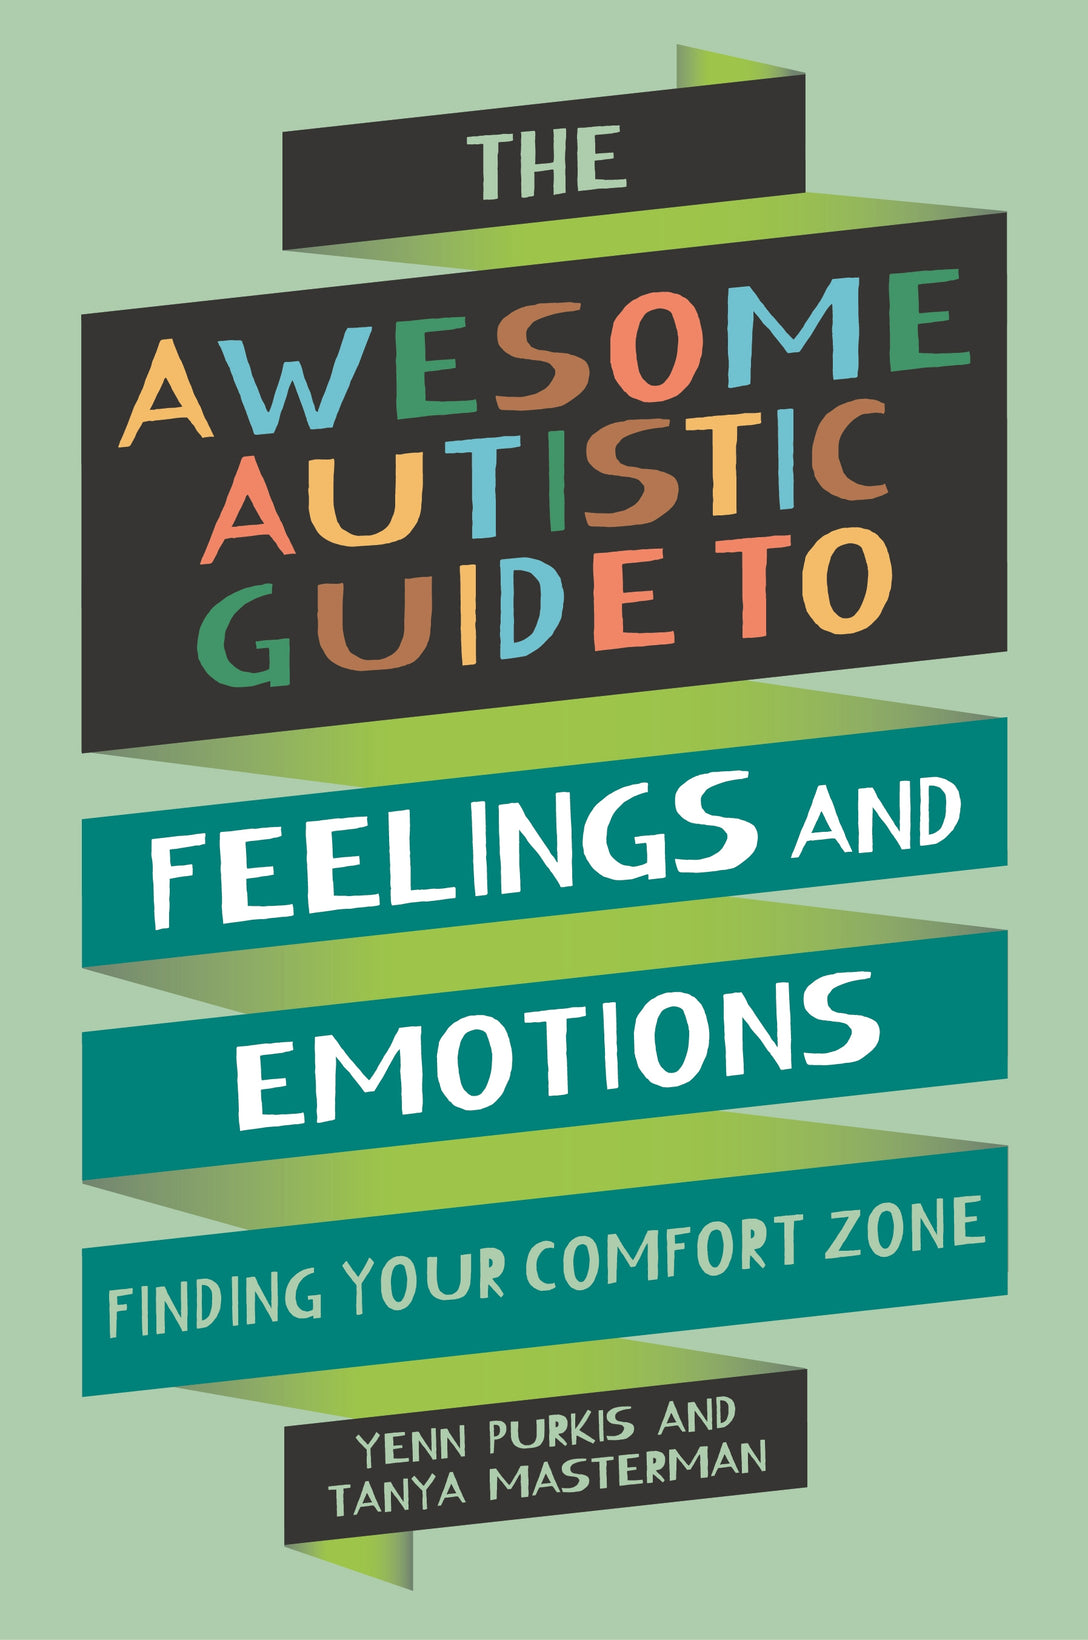 The Awesome Autistic Guide to Feelings and Emotions by Yenn Purkis, Tanya Masterman